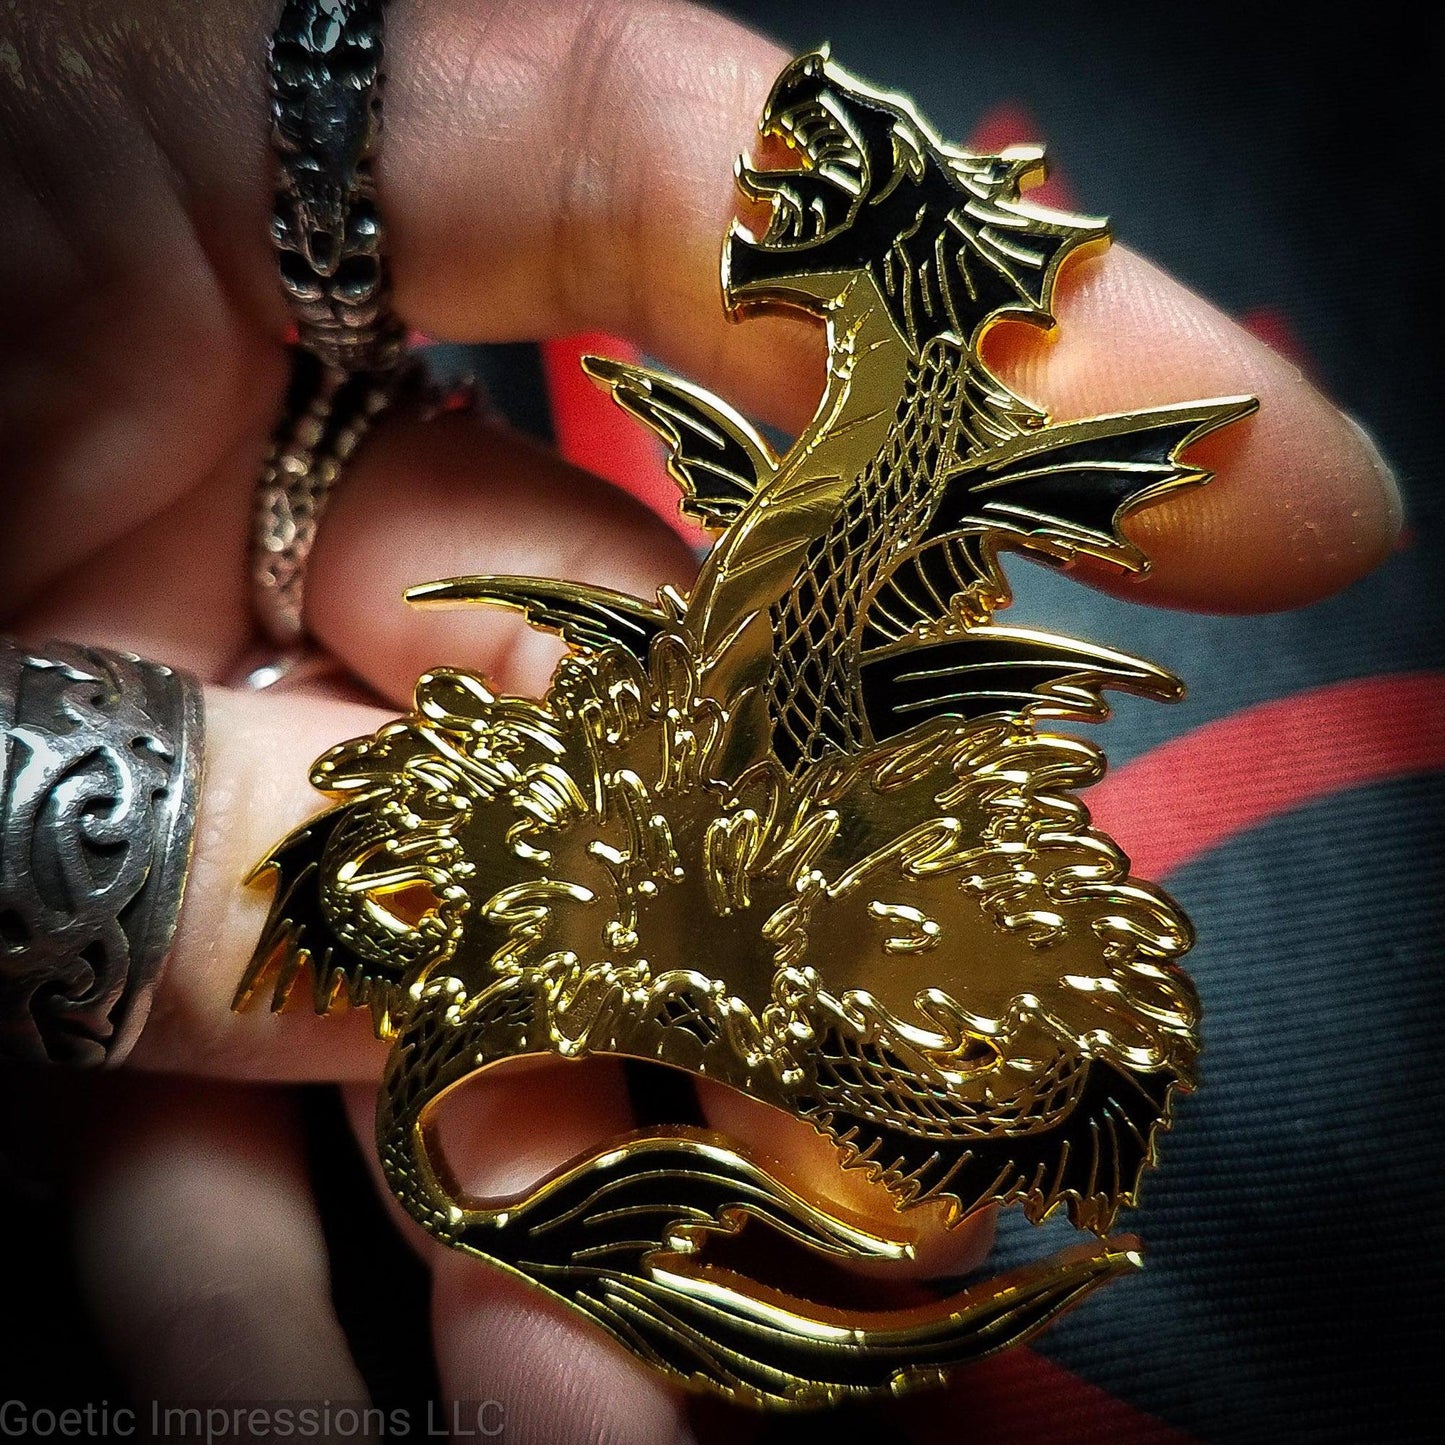 A ringed hand is holding a black and gold hard enamel pin of the sea serpent Leviathan. Leviathan is shown bursting from waters and jaws opened wide. 